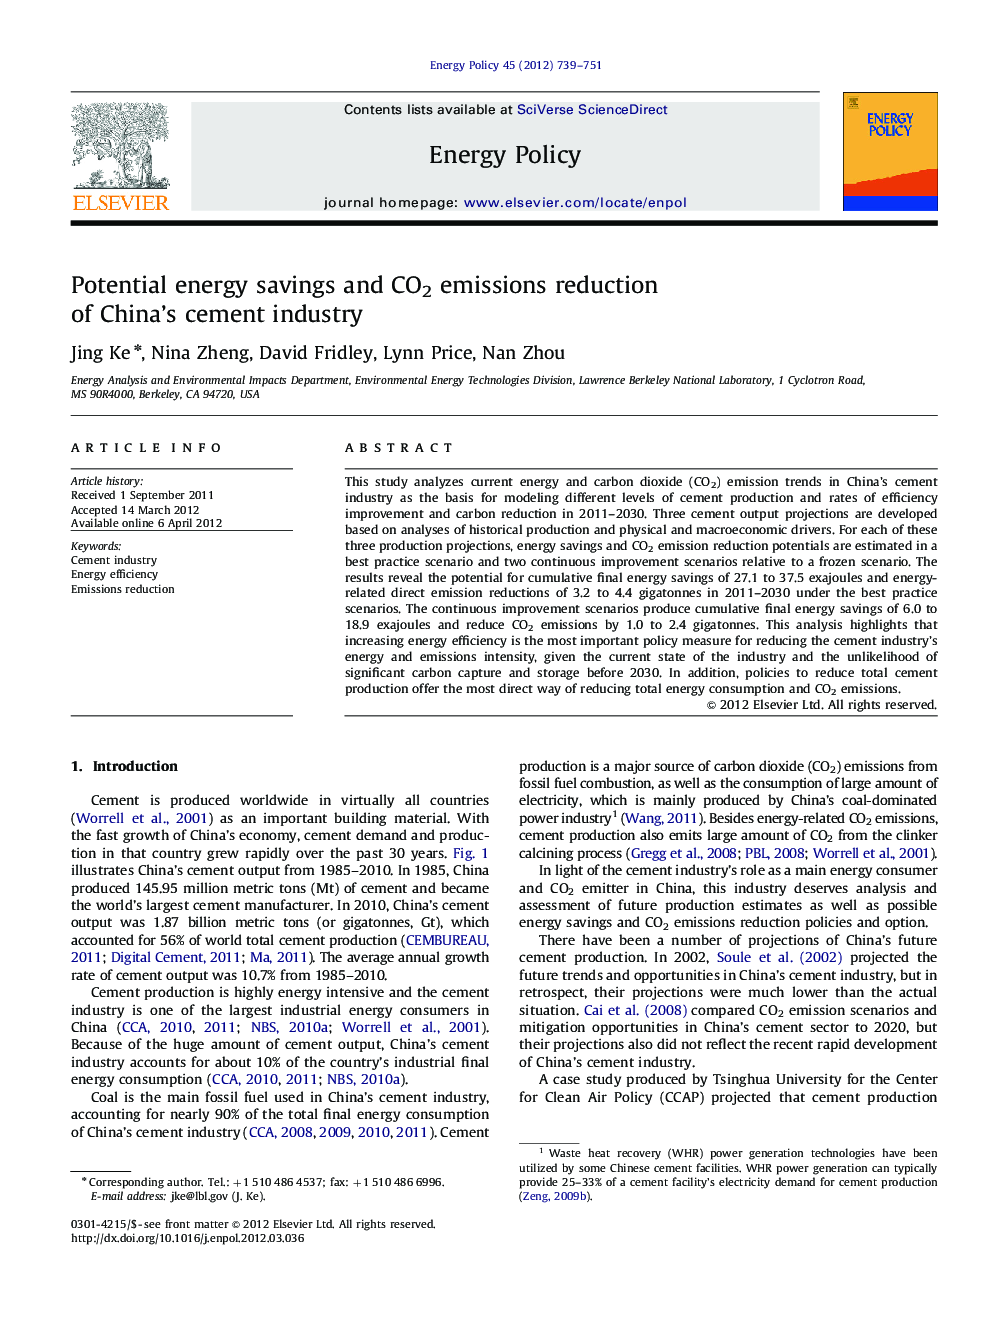 Potential energy savings and CO2 emissions reduction of China's cement industry